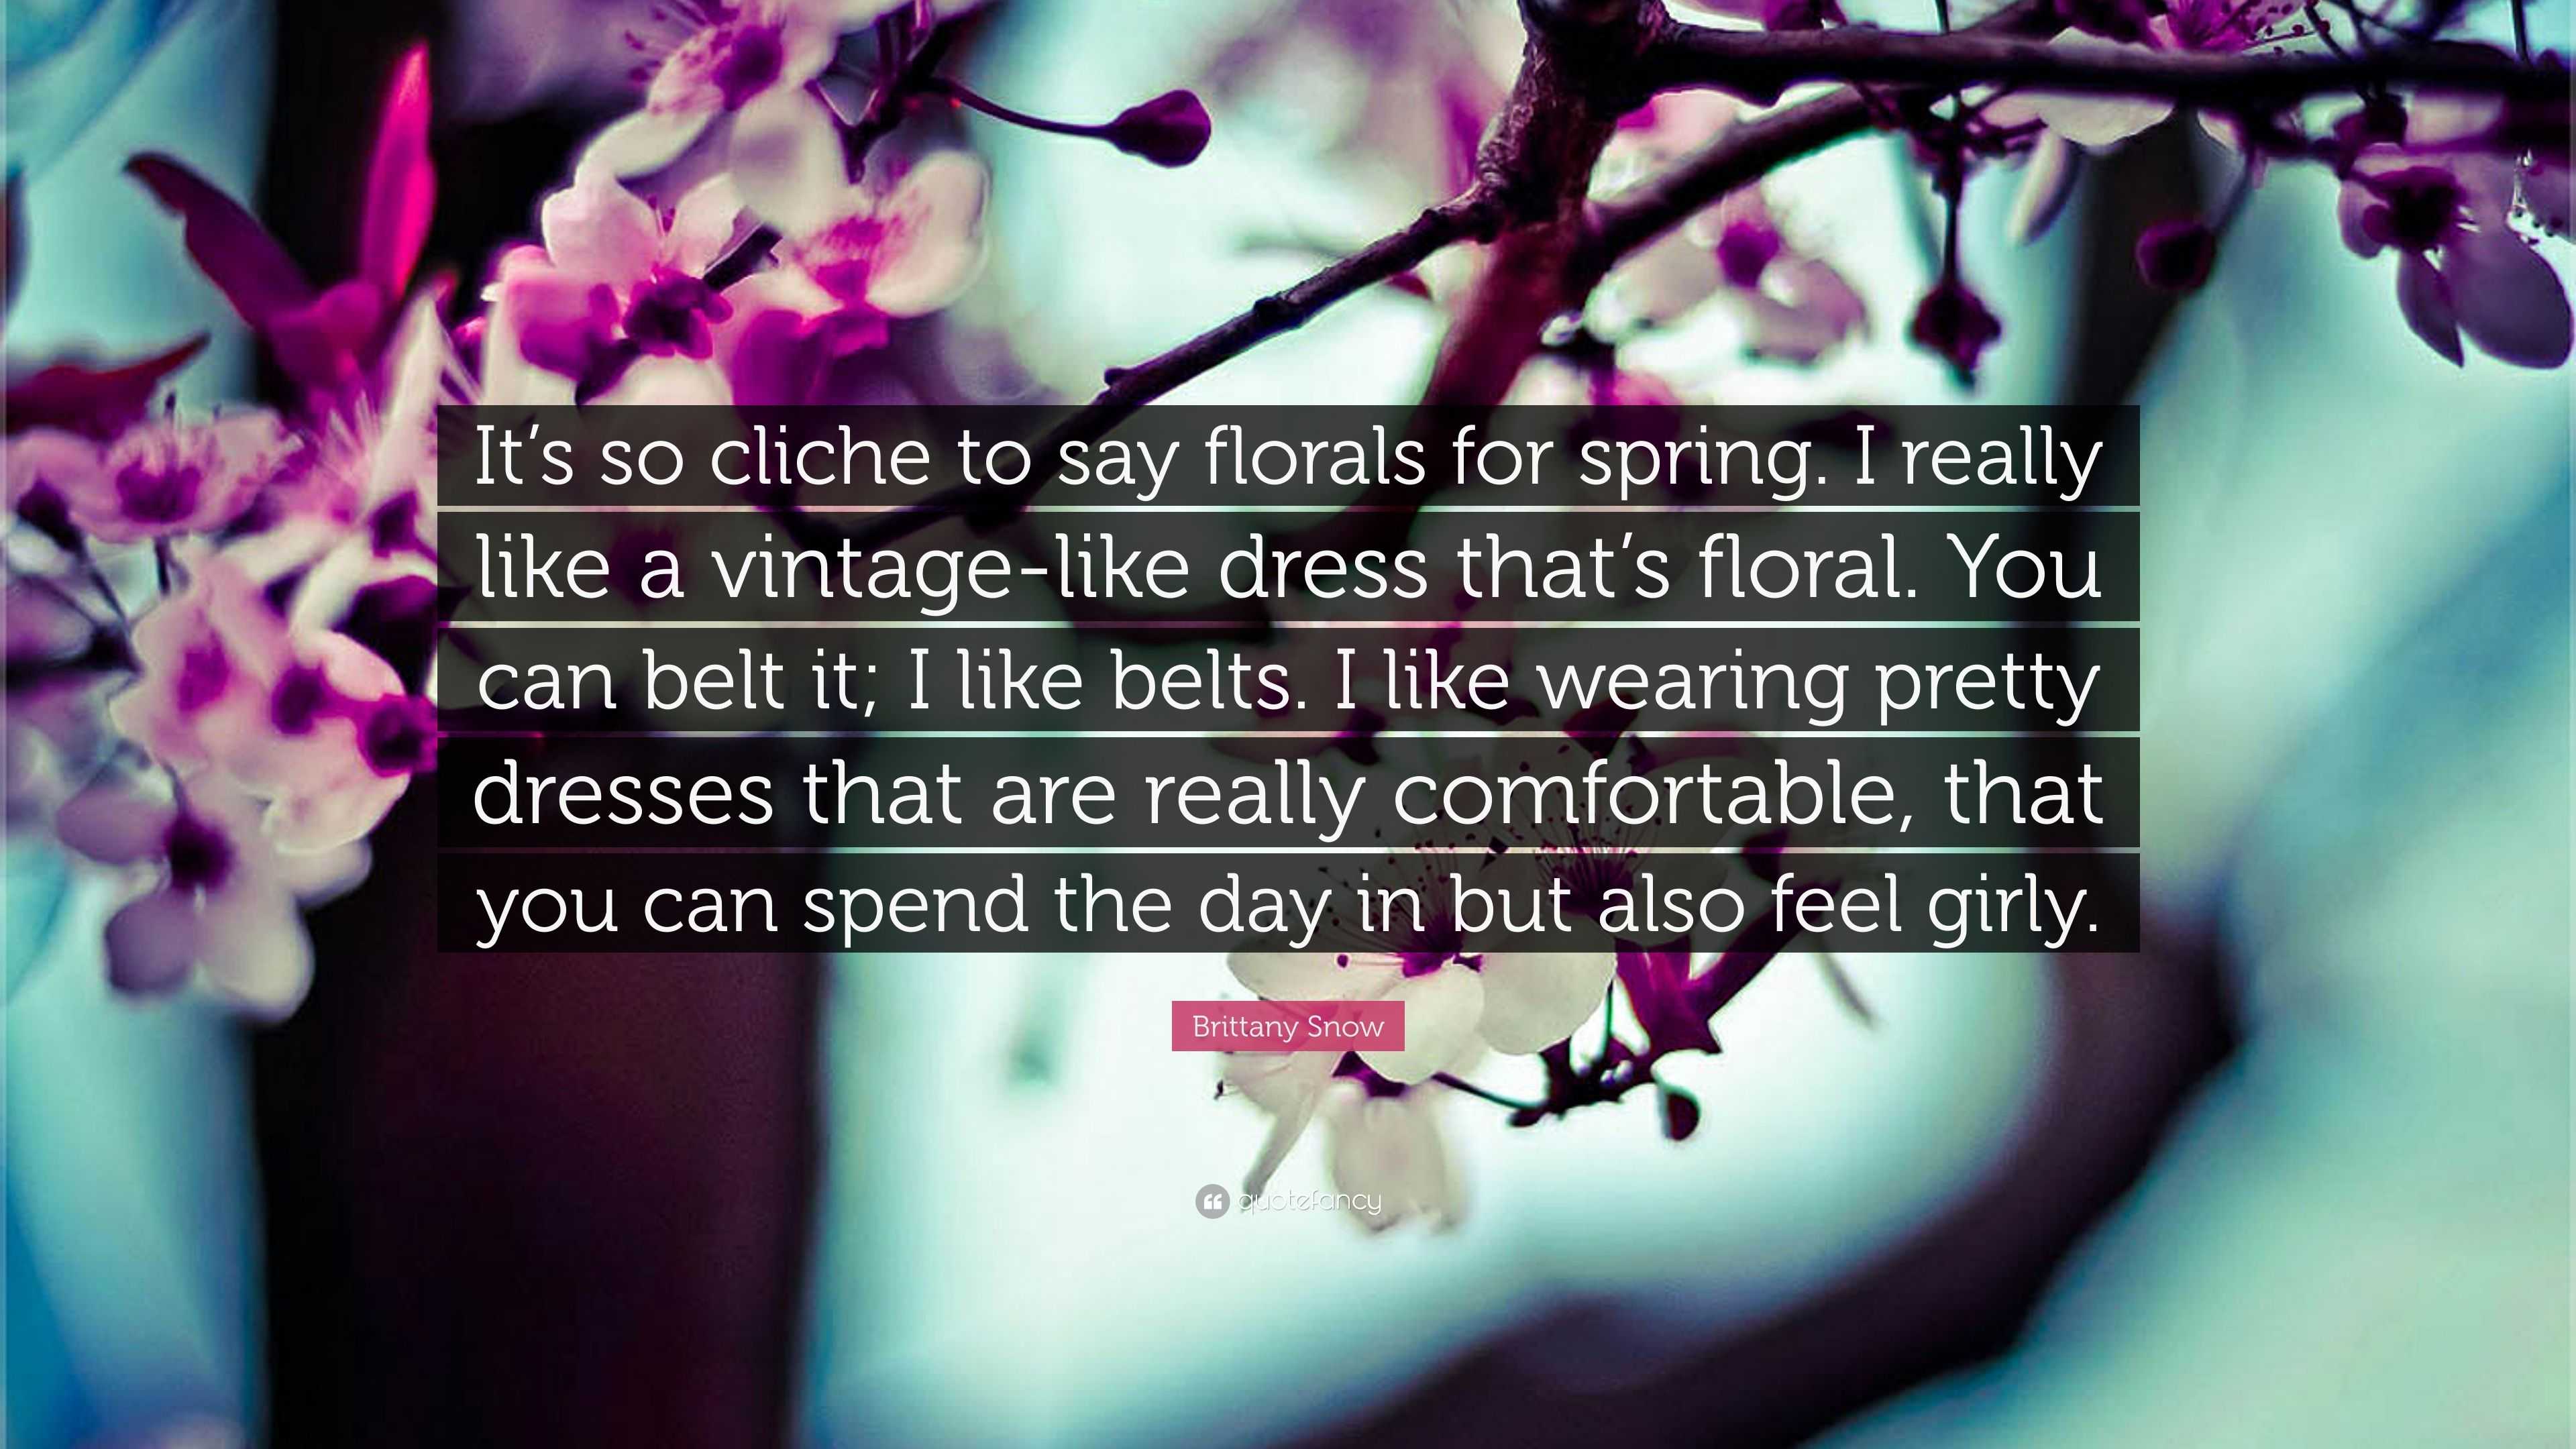 Brittany Snow Quote: “It's so cliche to say florals for spring. I ...